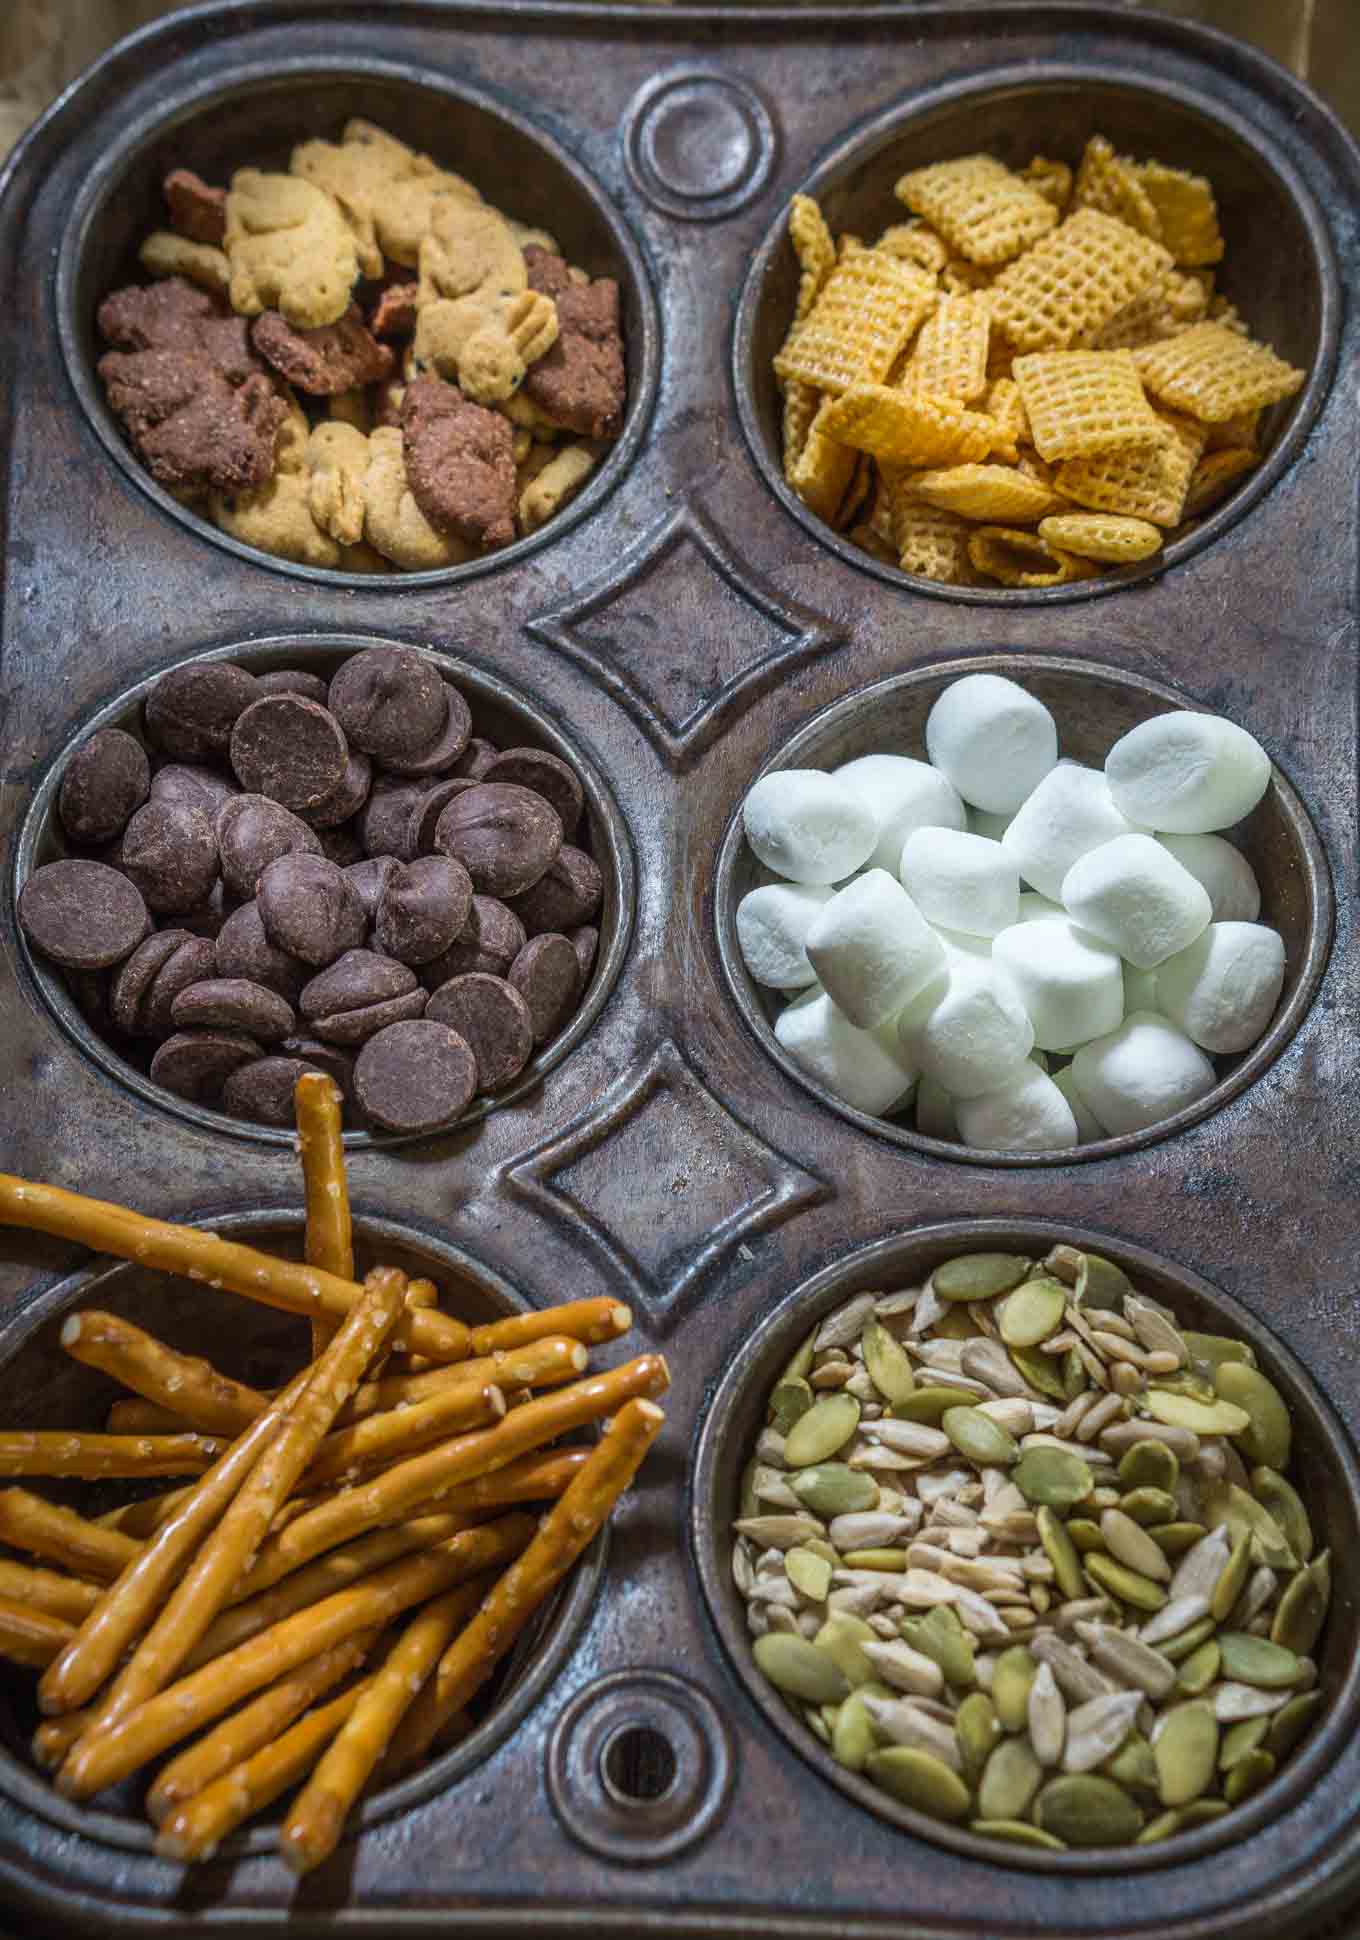 A muffin tin filled with the ingredients for kids trail mix including graham crackers shaped like bunnies, cereal squares, marshmallows, pretzel sticks, and chocolate chips